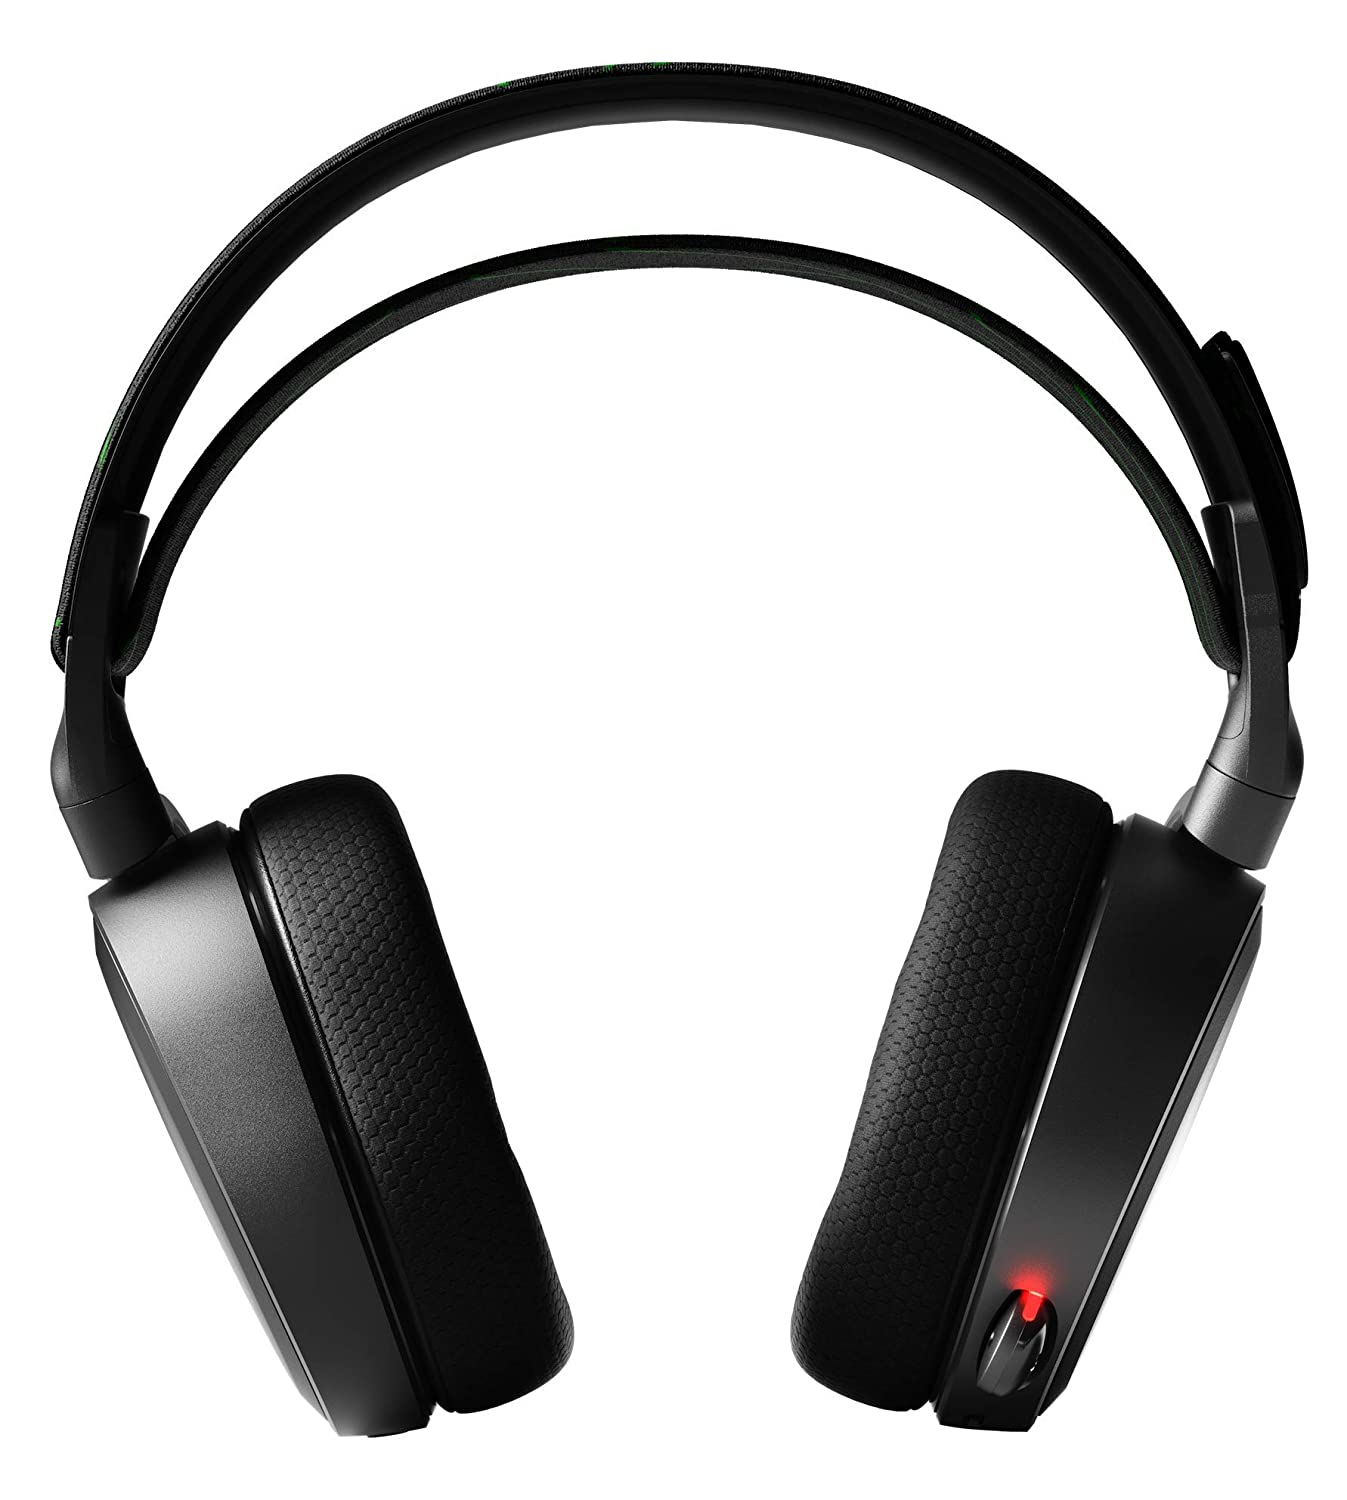 SteelSeries Arctis 9X Wireless Gaming Headset – Integrated Xbox Wireless + Bluetooth – 20+ Hour Battery Life